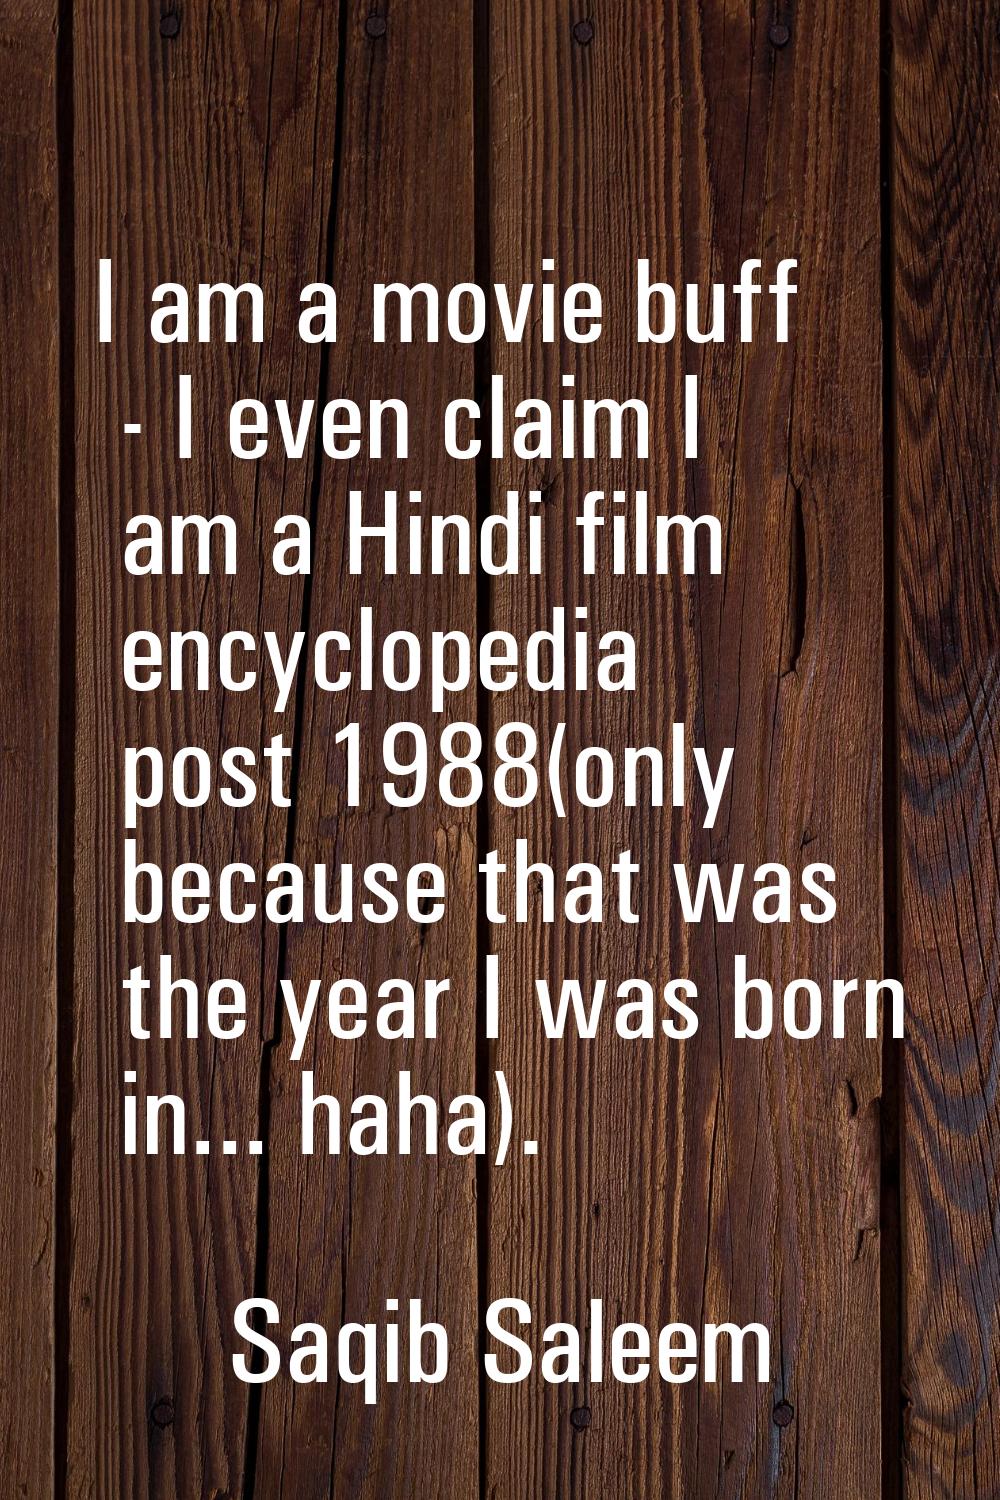 I am a movie buff - I even claim I am a Hindi film encyclopedia post 1988(only because that was the